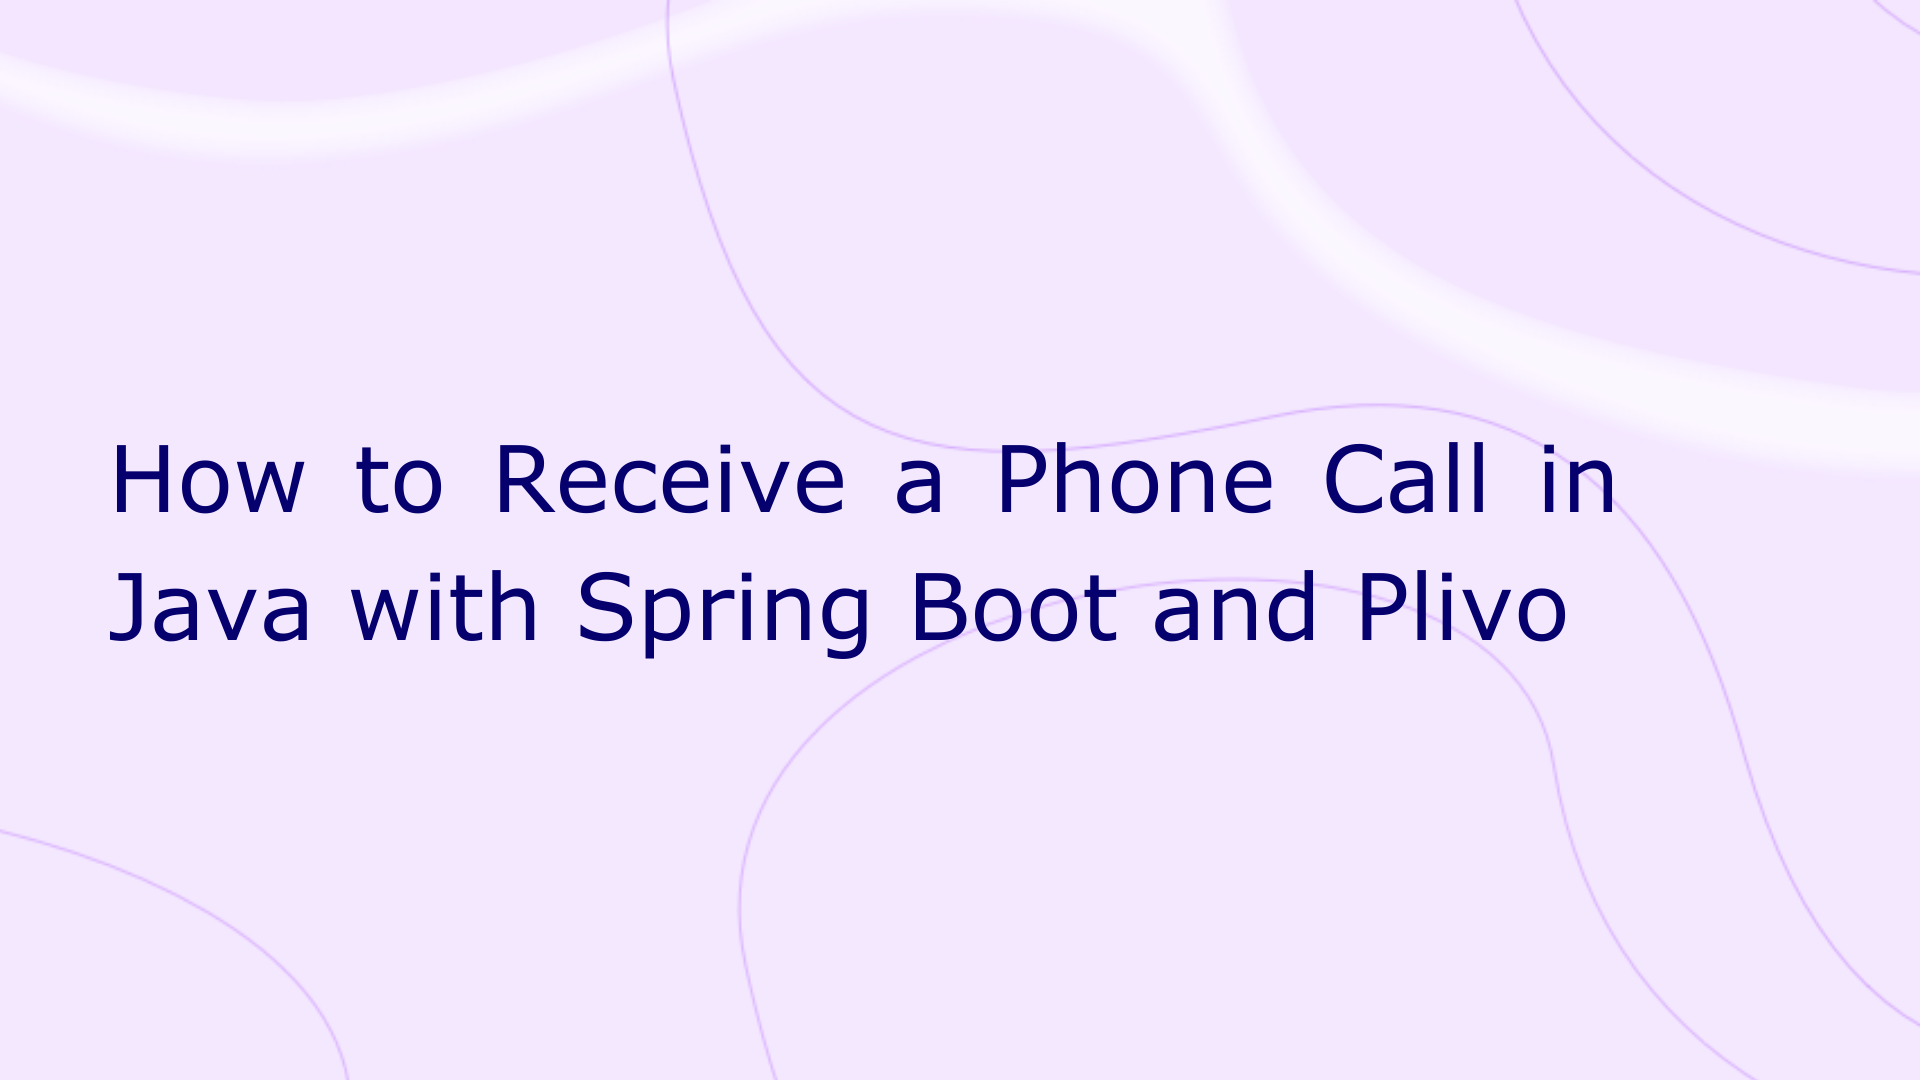 How to Receive a Phone Call in Java with Spring Boot and Plivo